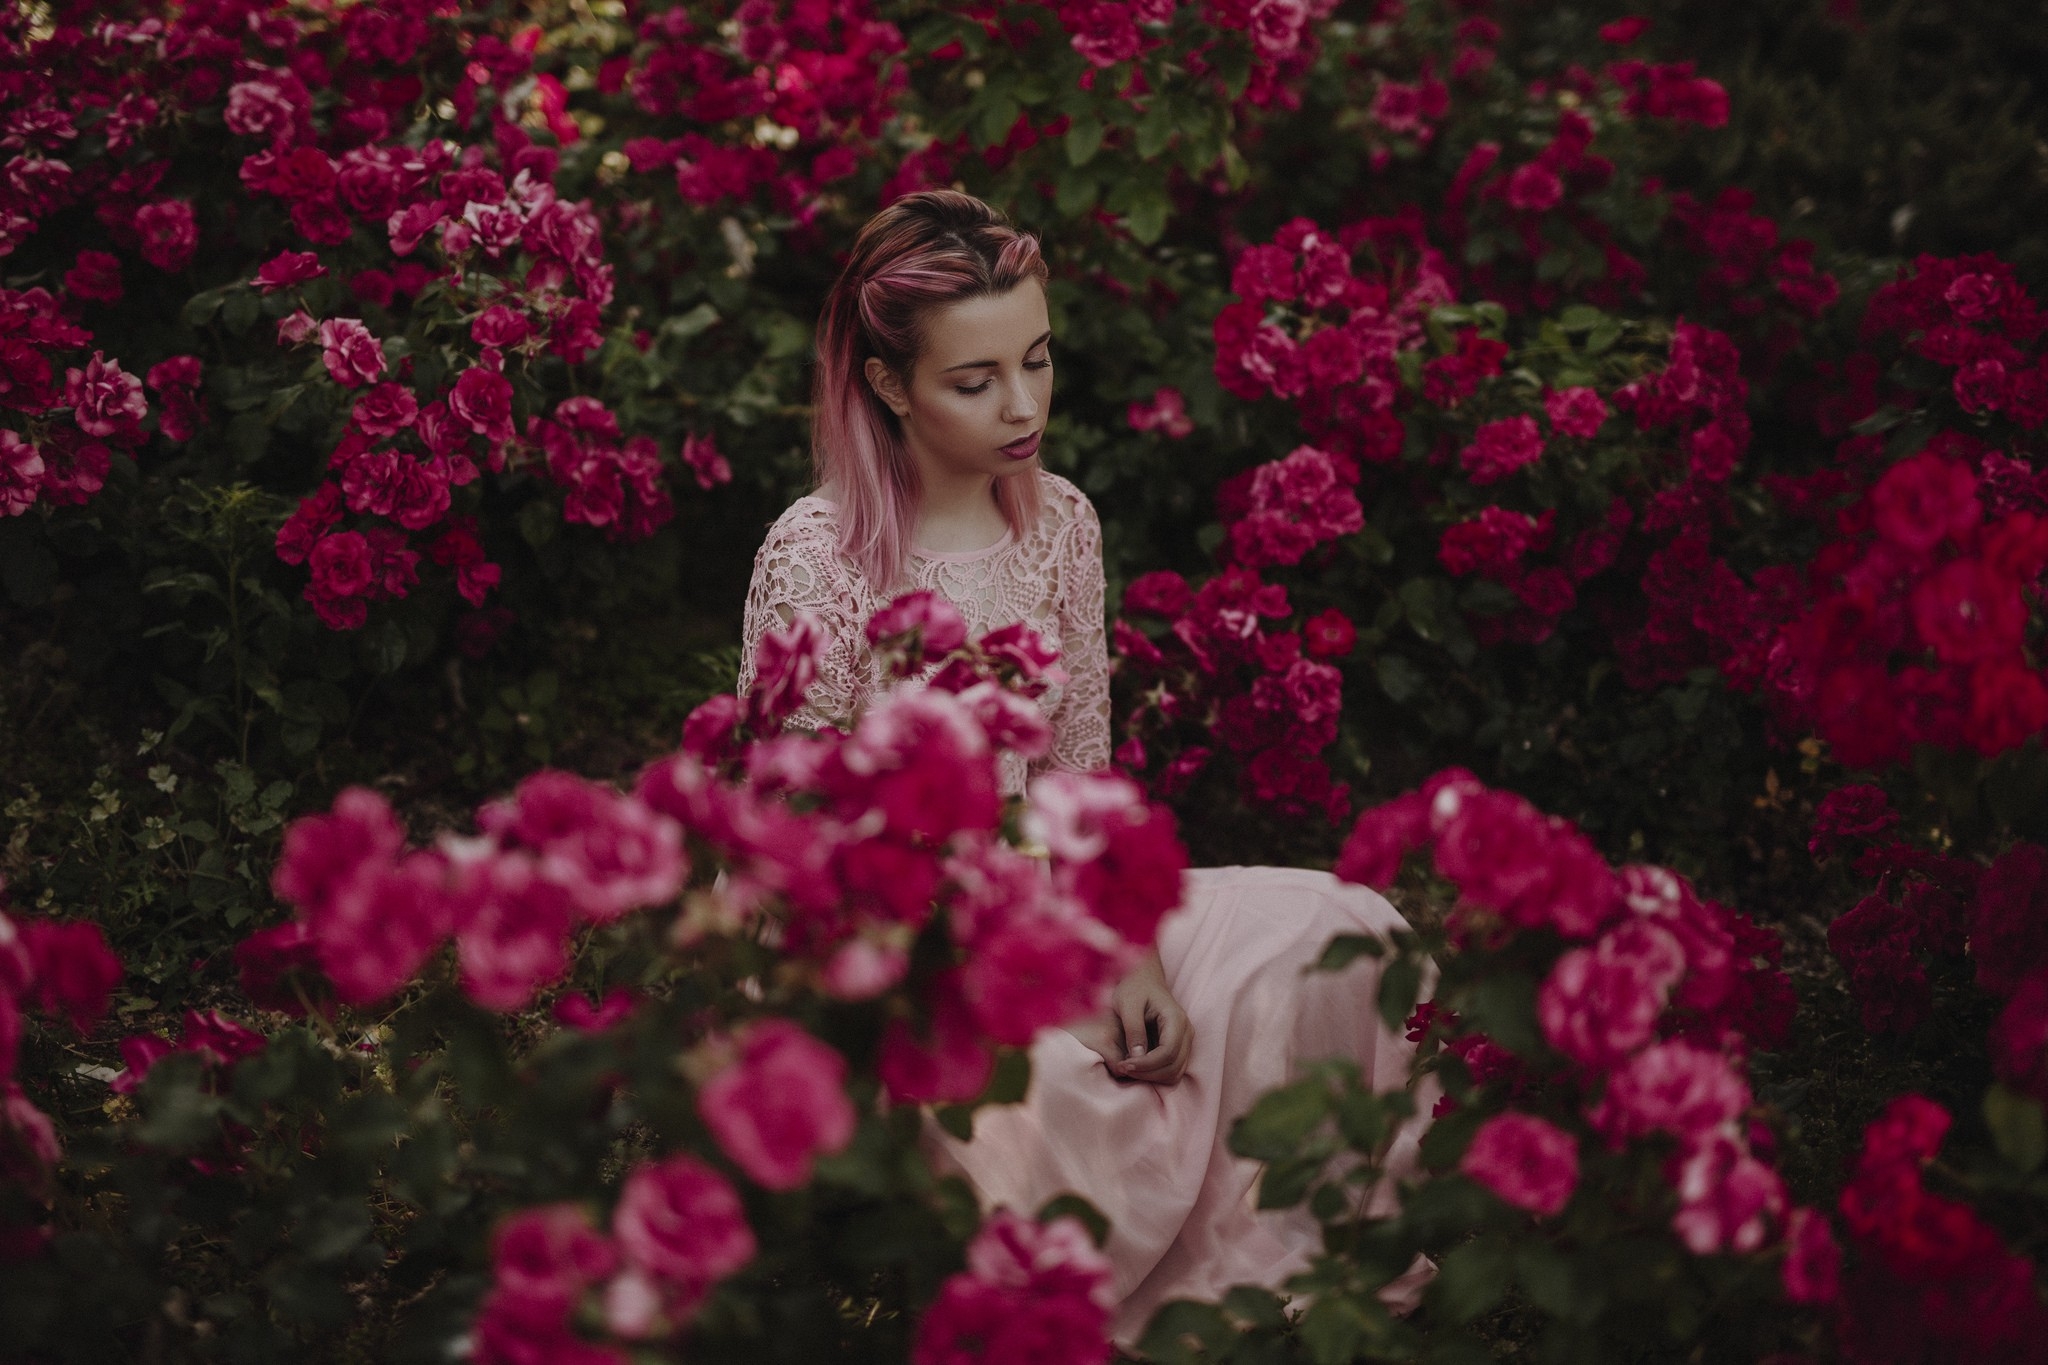 A girl in a pink dress sitting in a garden among pink roses